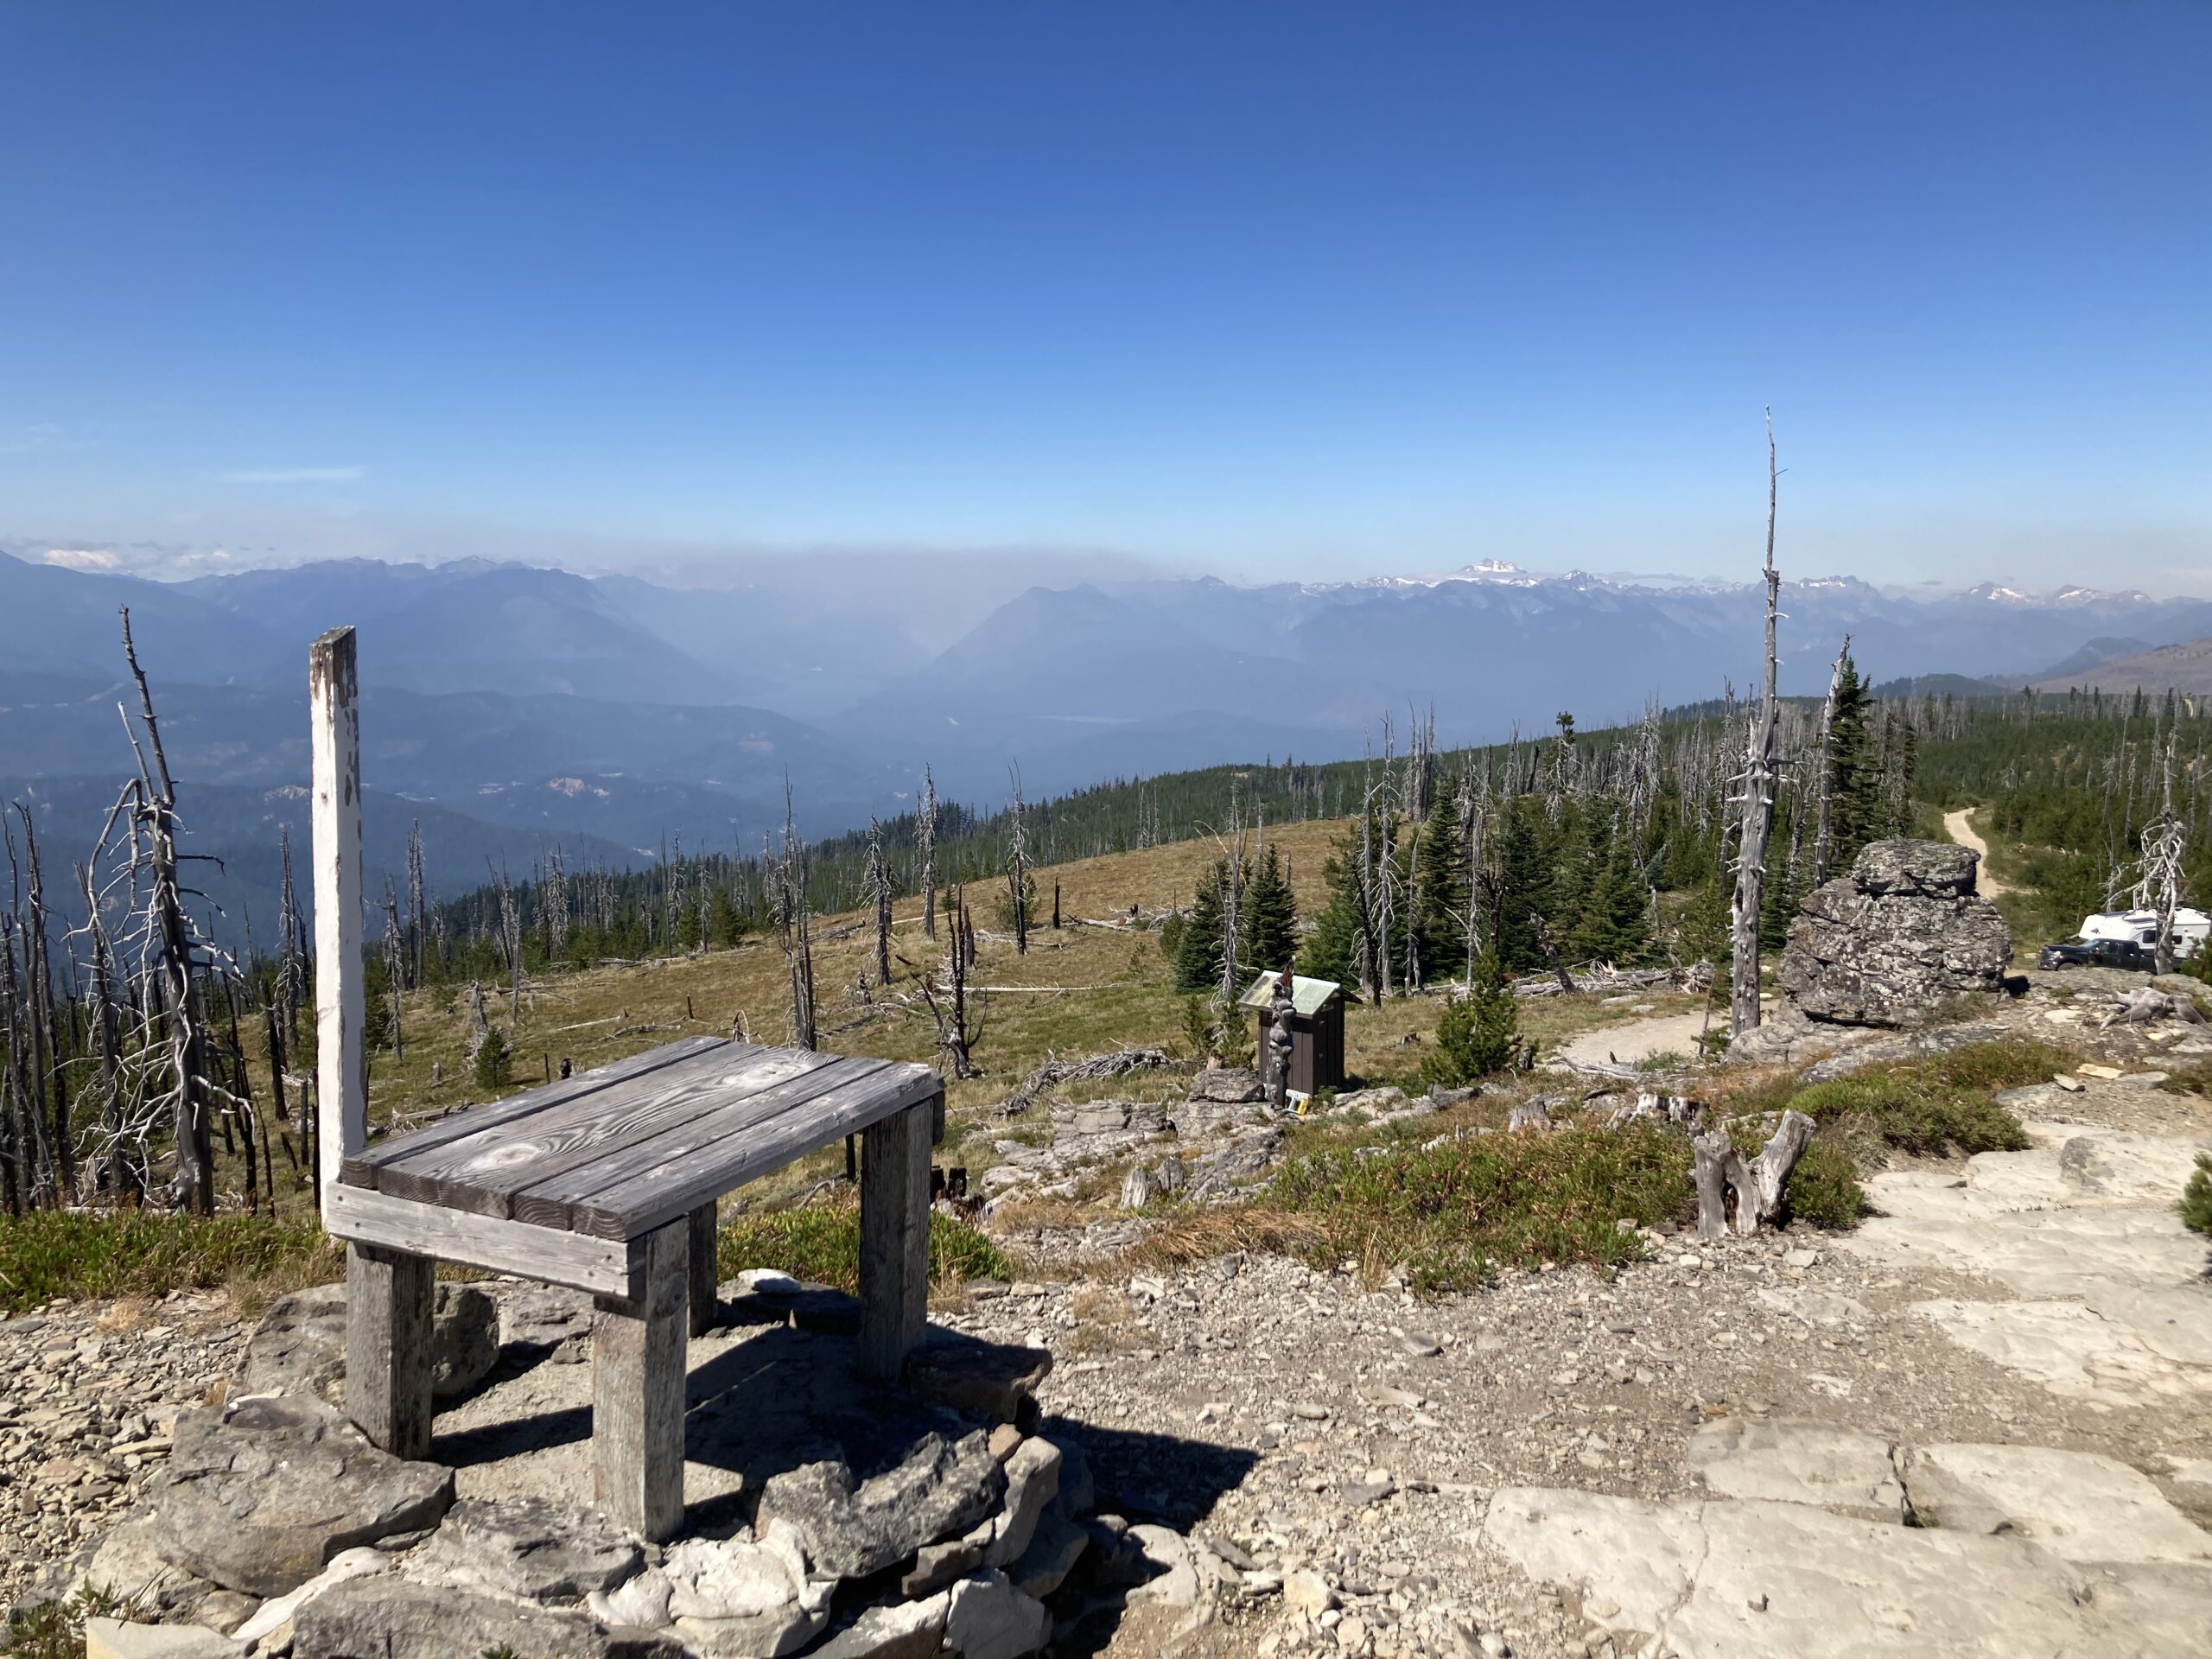 Glacier Peak and the smoke from two fires, as seen from the Sugarloaf Lookout tower.